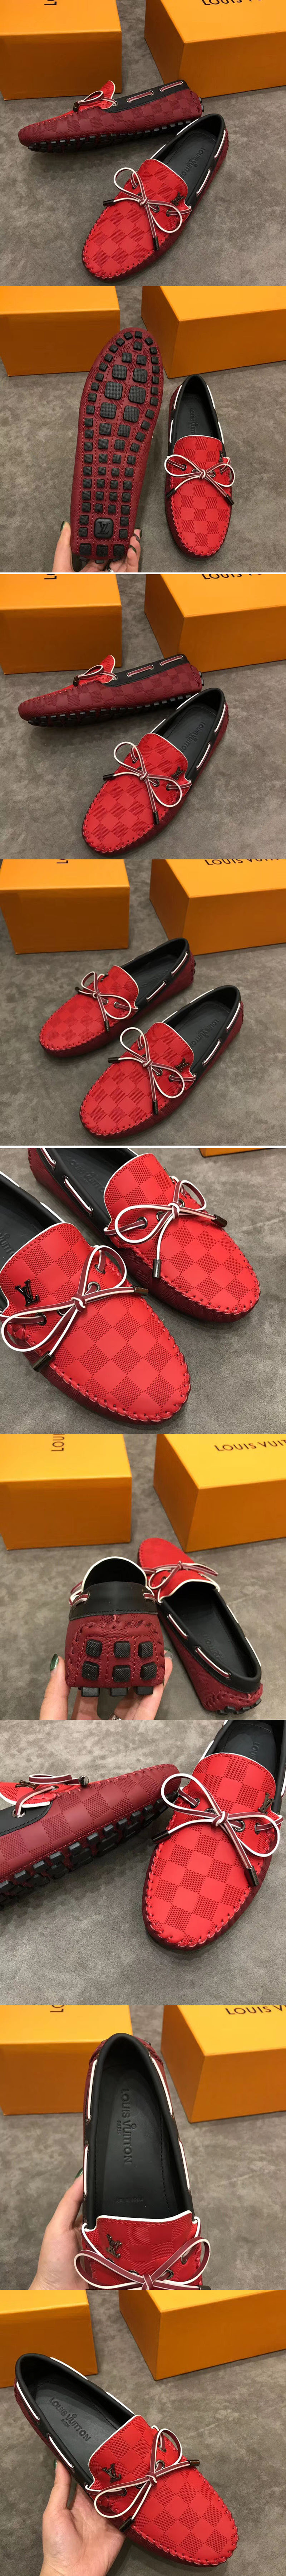 Replica Louis Vuitton LV Arizona Mocassin Shoes Damier Embossed Calf leather Red